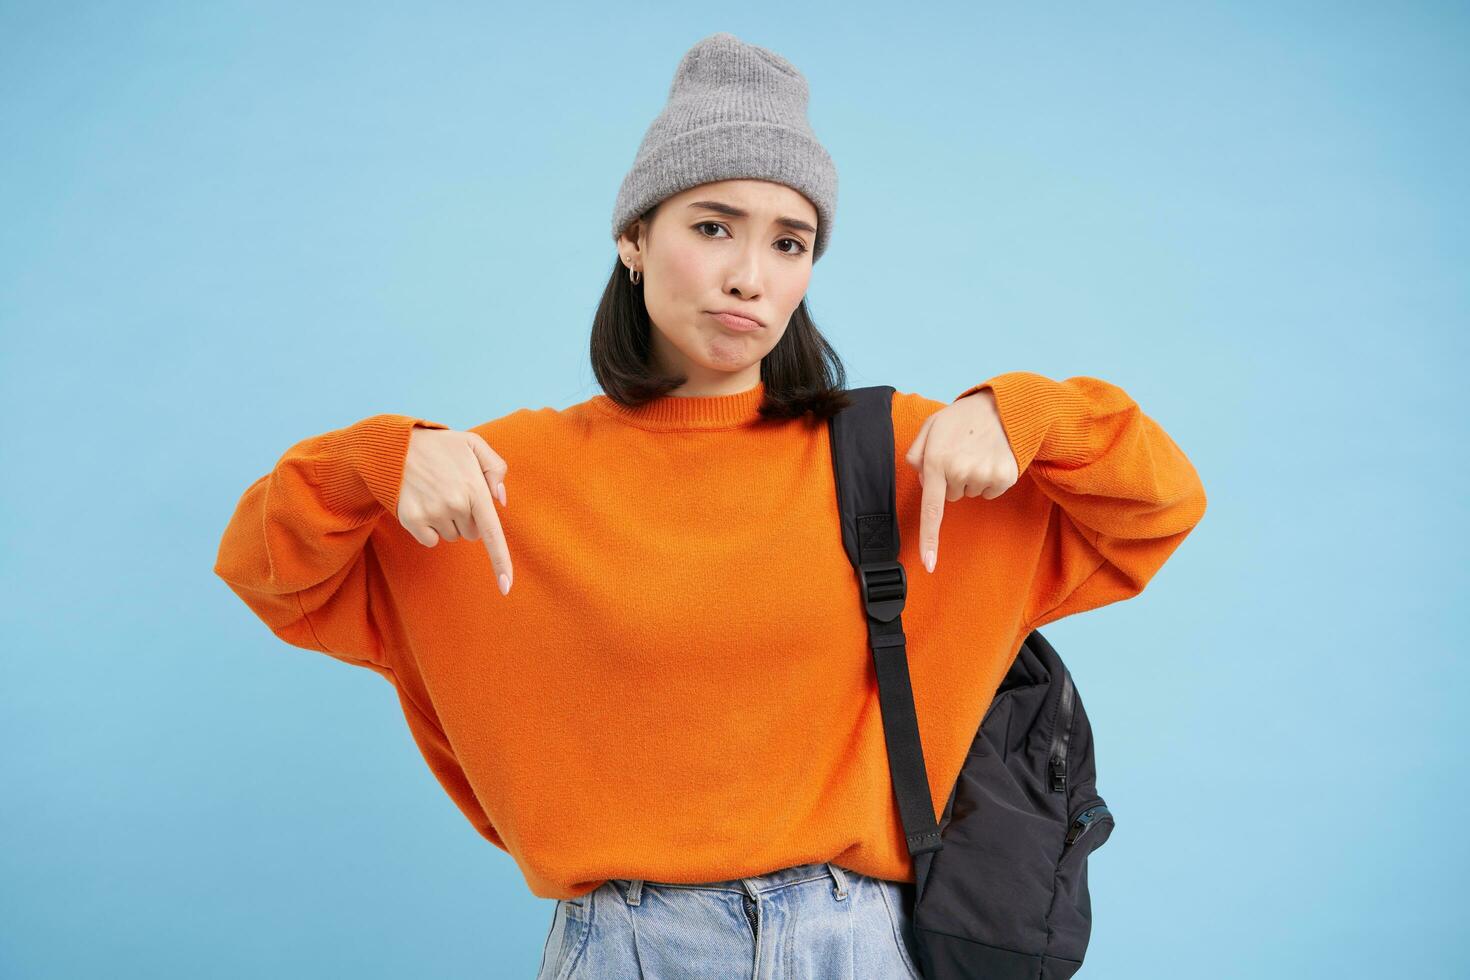 Asian woman in warm hat, wears street outfit and backpack, points fingers down, shows advertisement below, standing over blue background photo